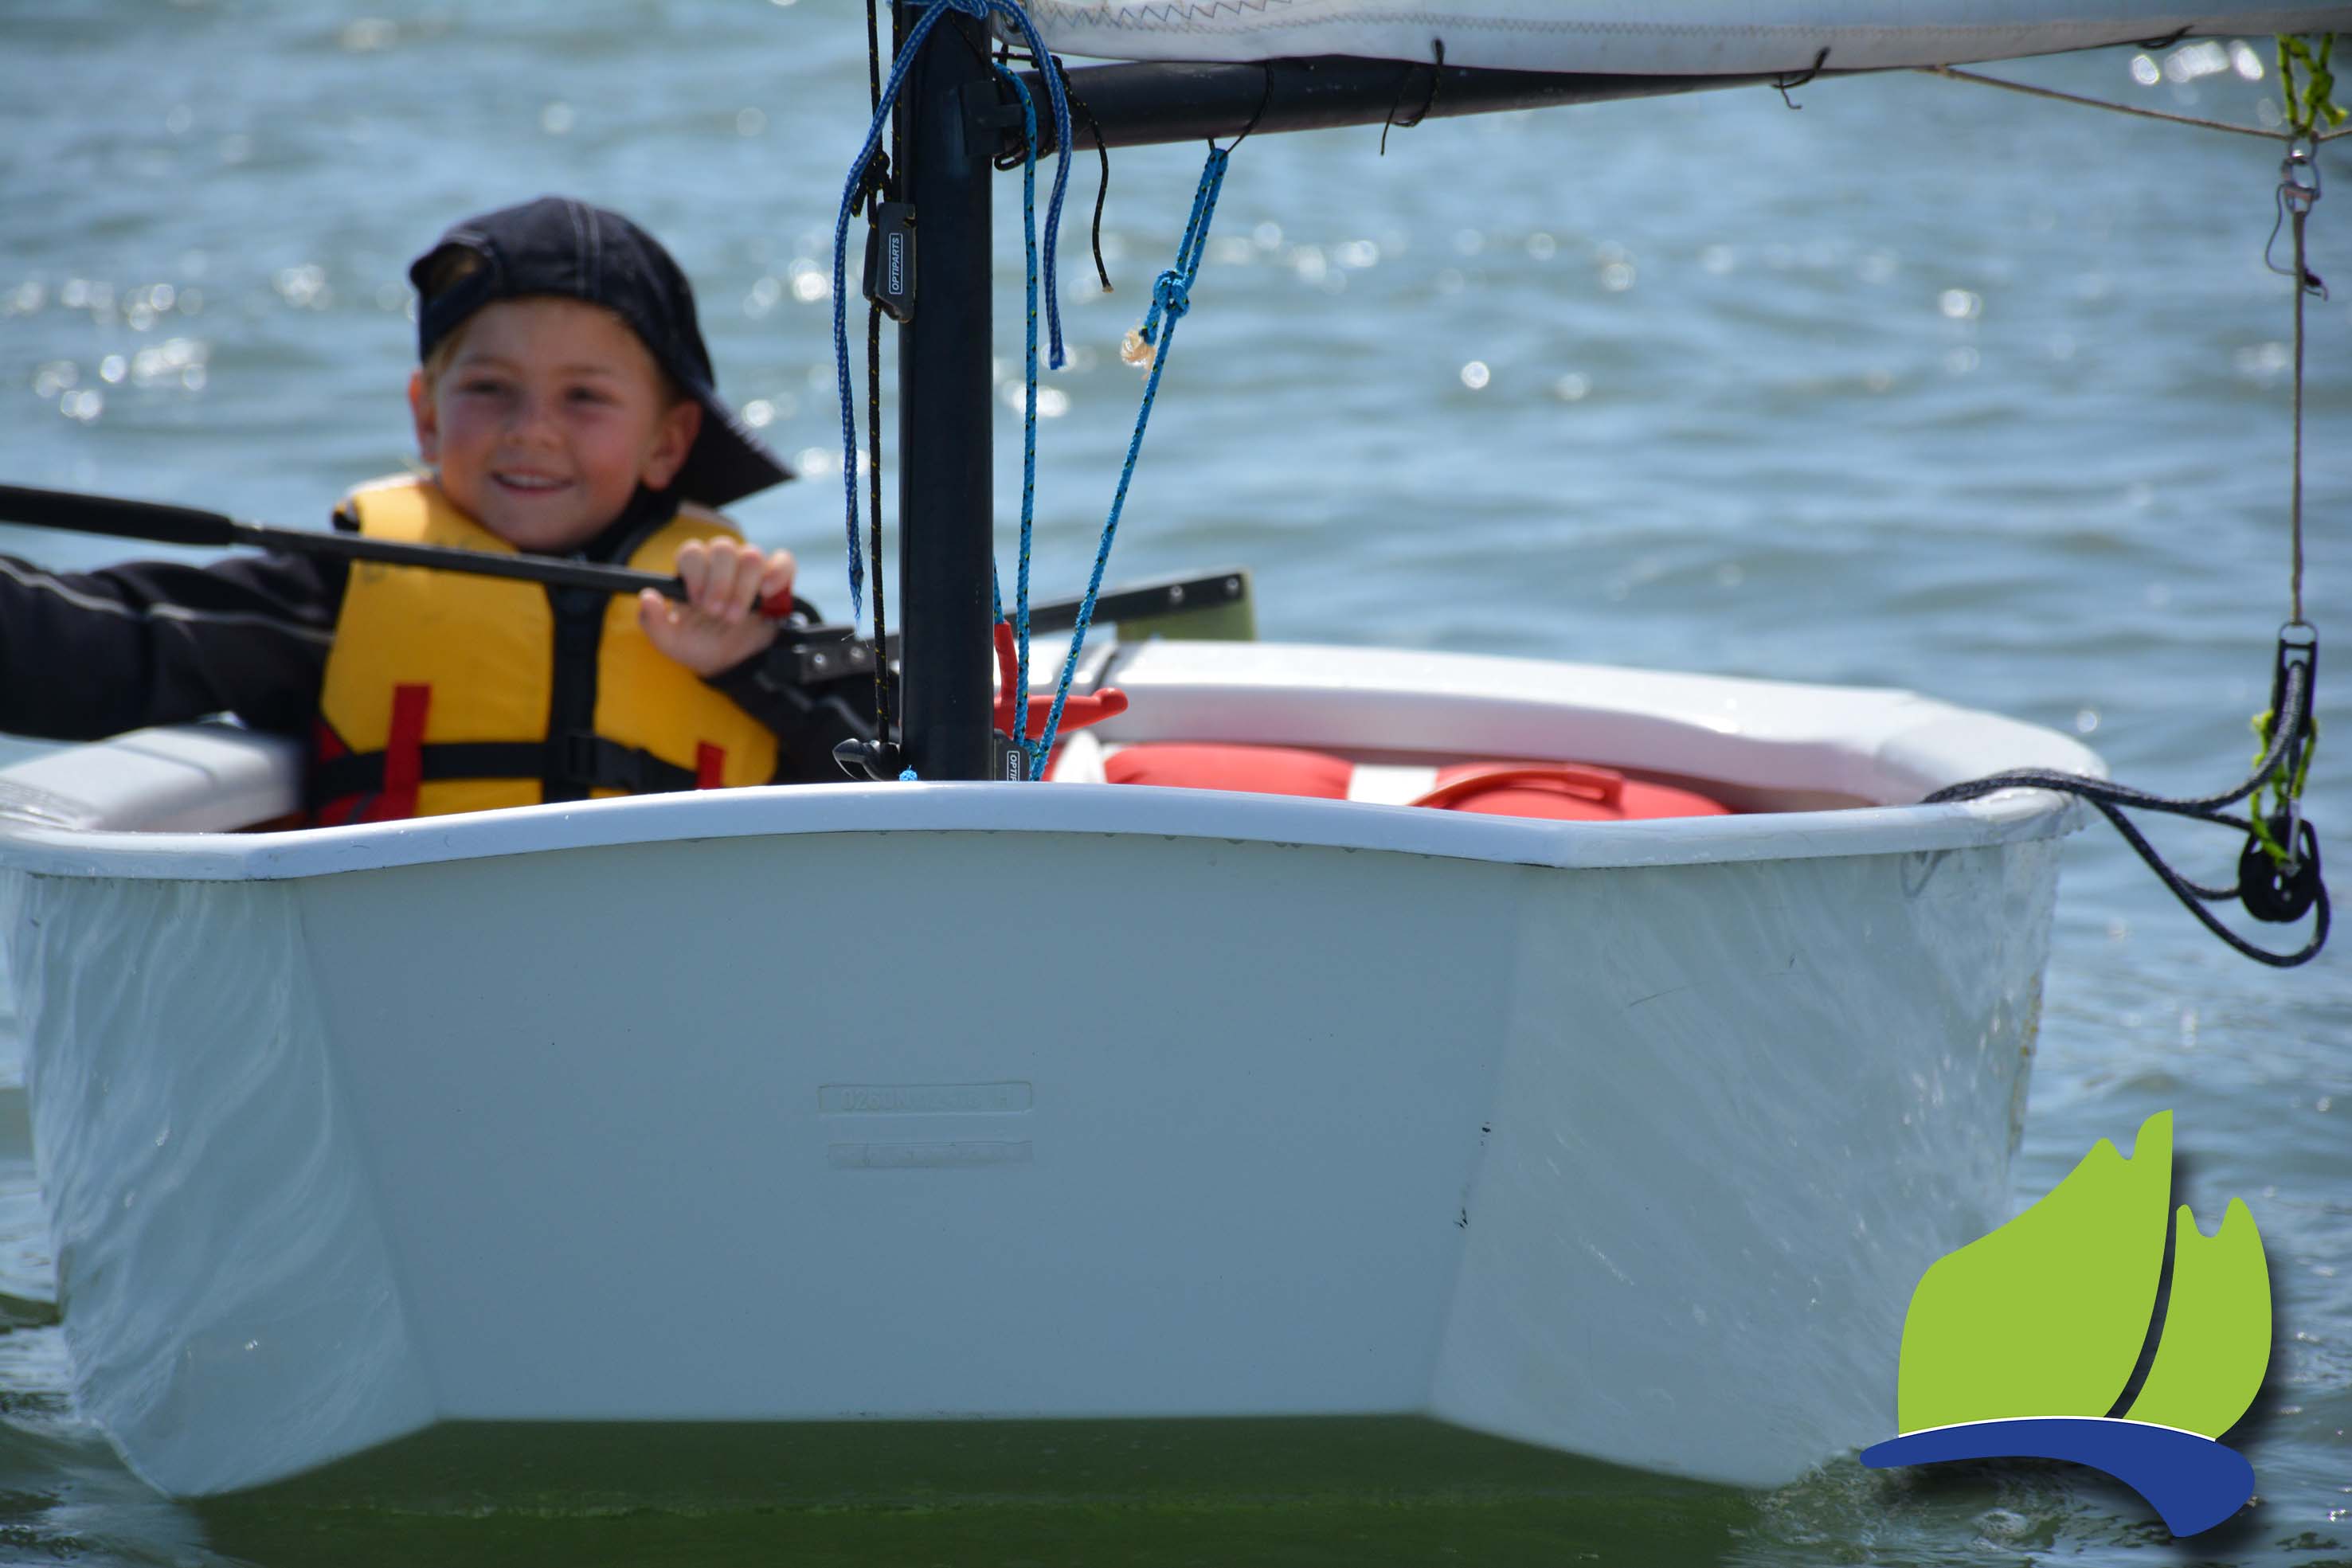 Darcy Higgins had a great time sailing in the Optimist Green Fleet.